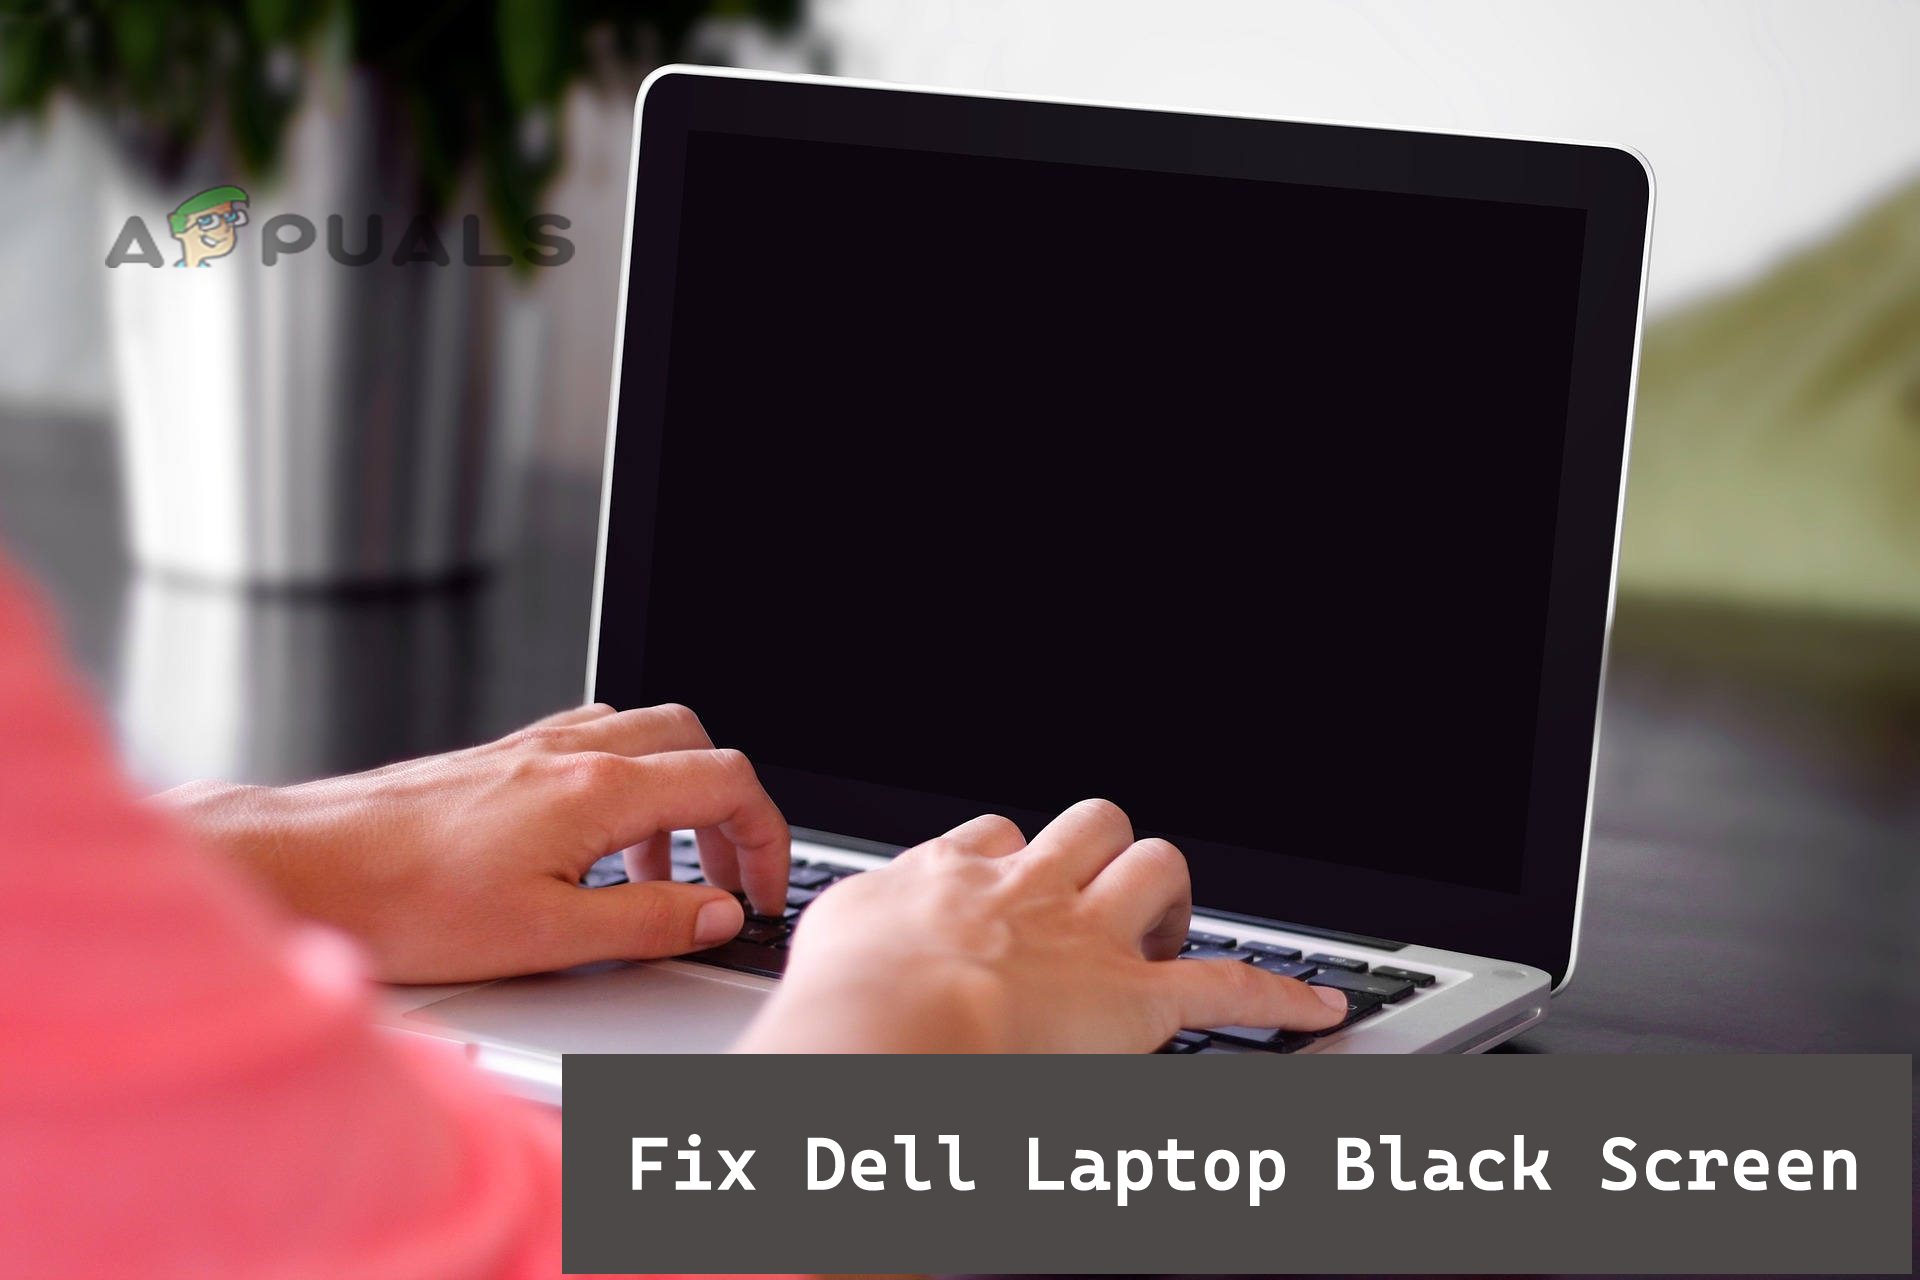 How to Fix Black Screen Issue on Dell Laptop?